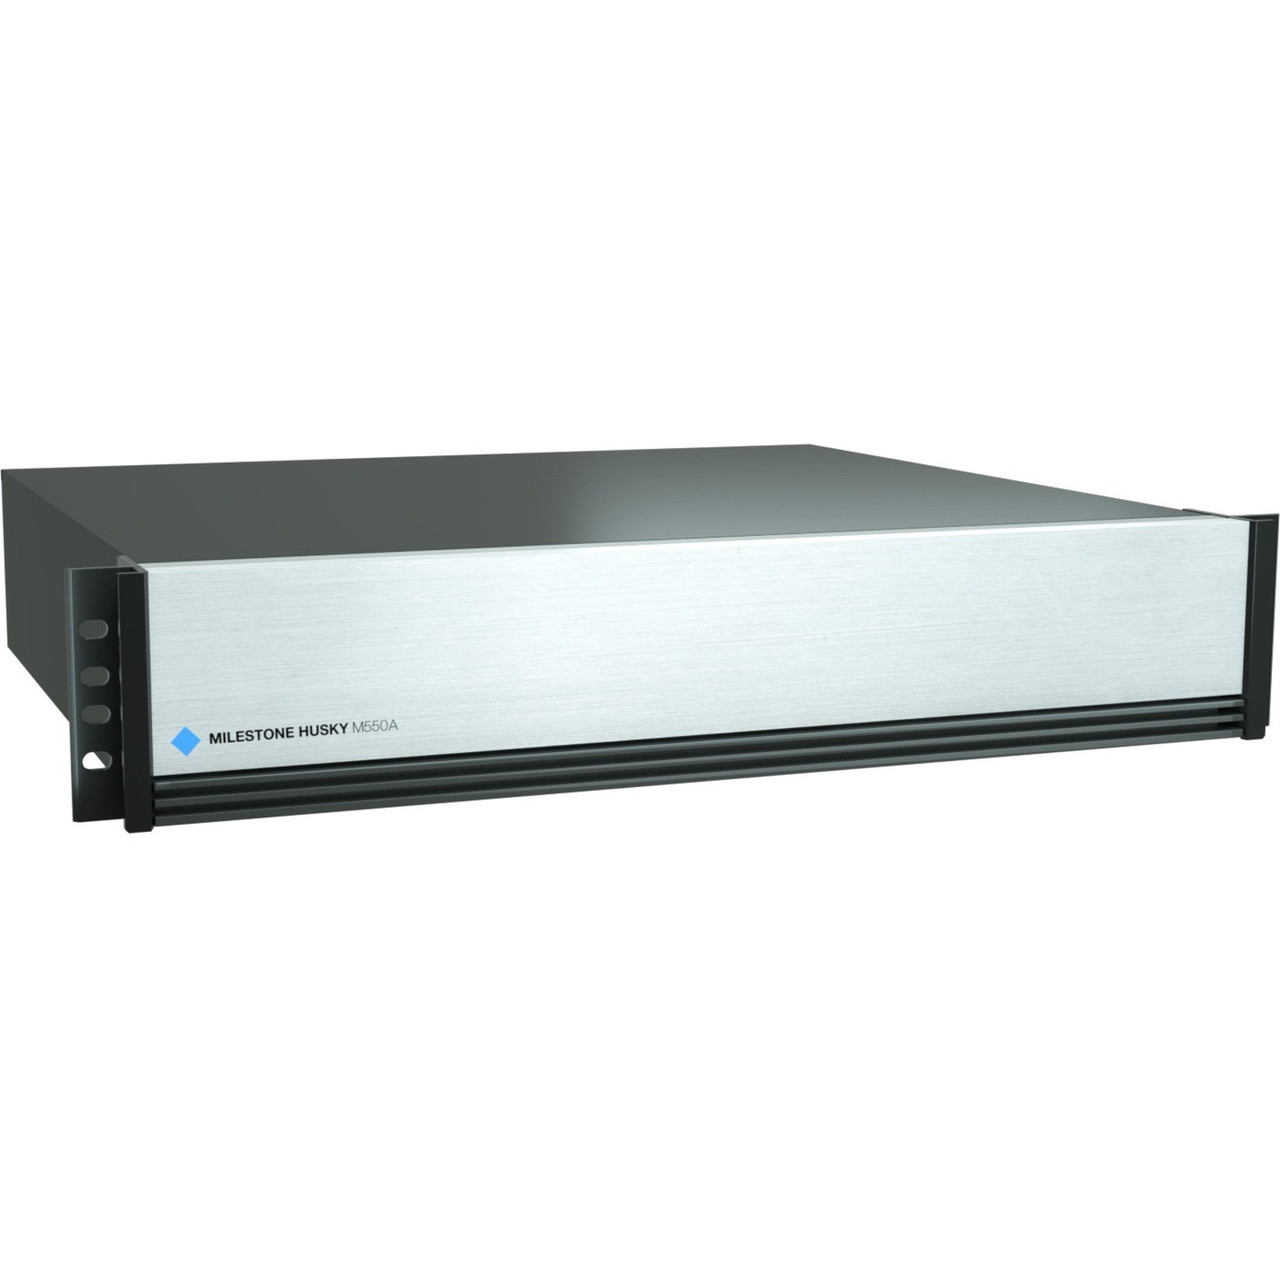 Milestone Systems Husky M550A Network Video Recorder - 64 TB HDD - HM550A-XPET-64TB